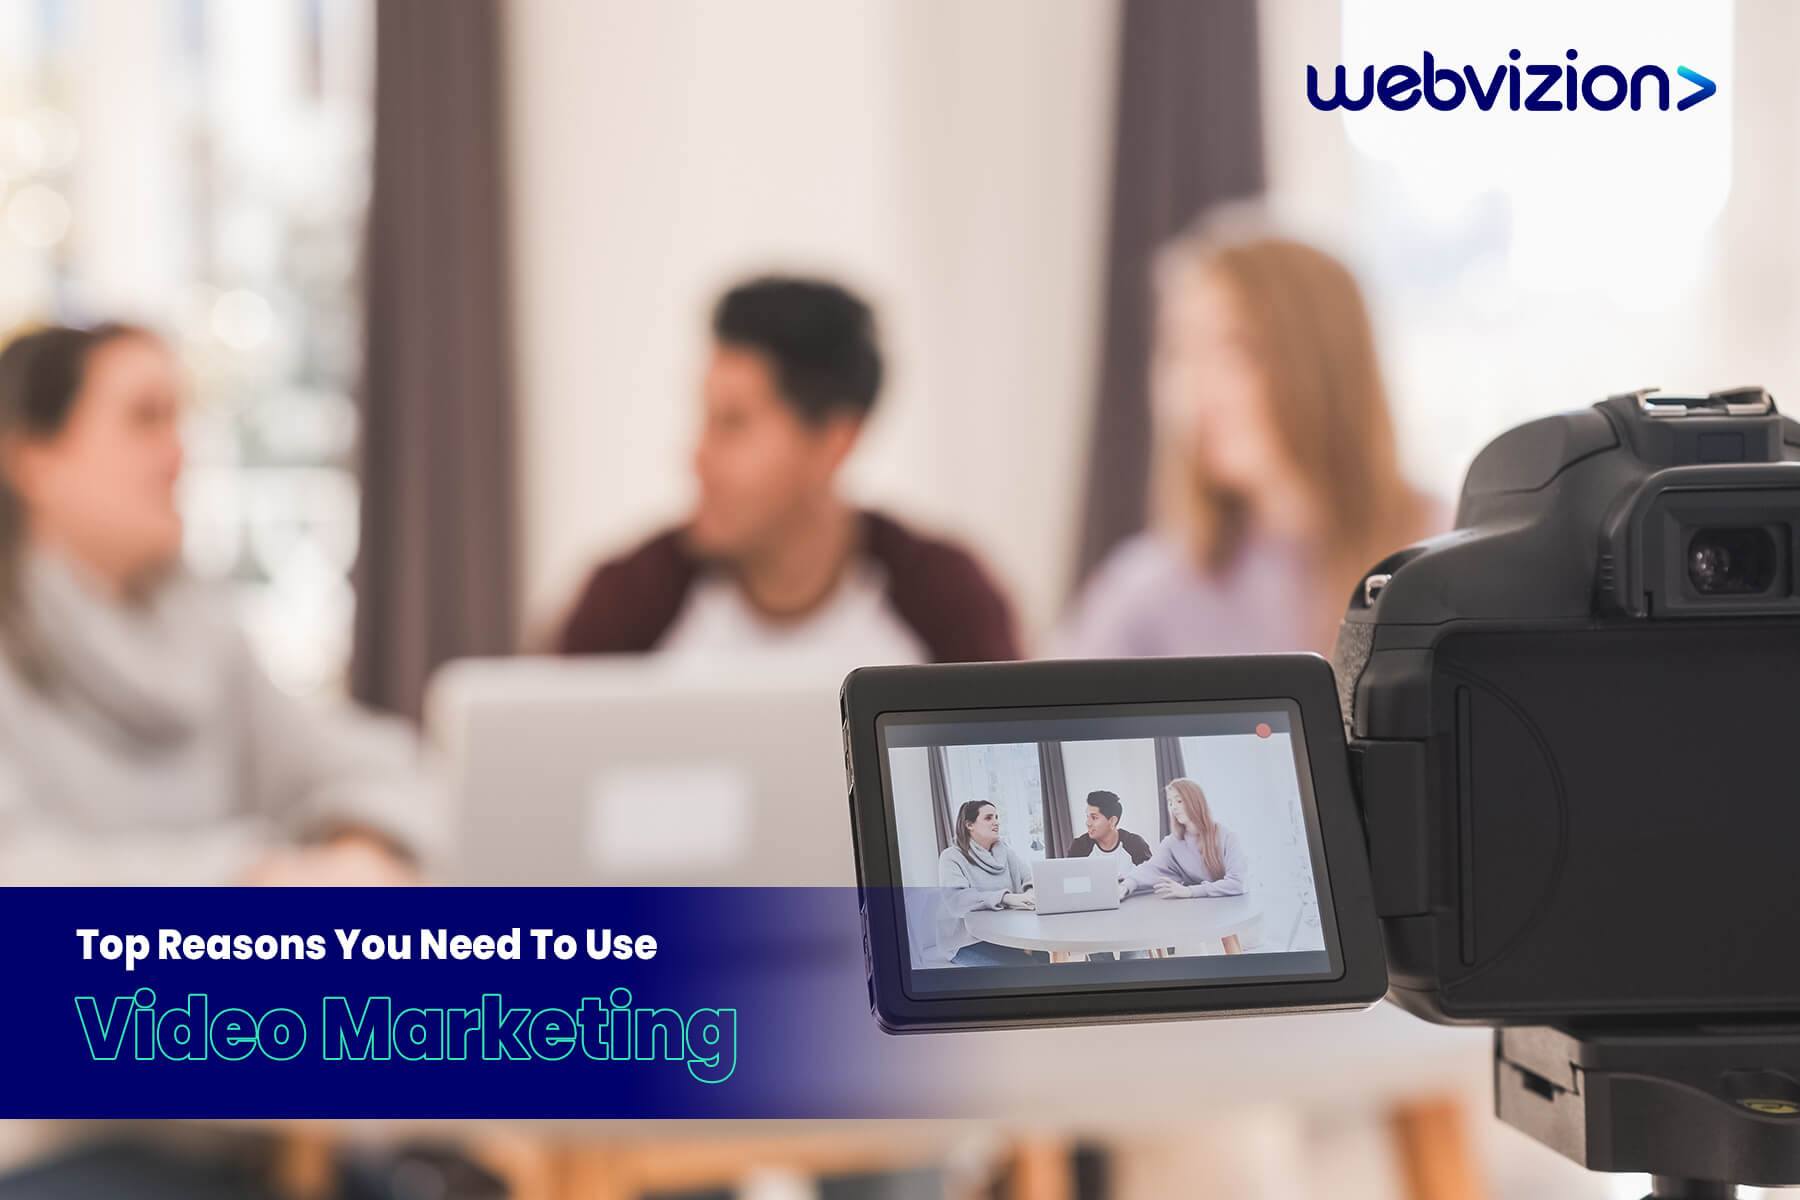 Top Reasons You Need To Use Video Marketing